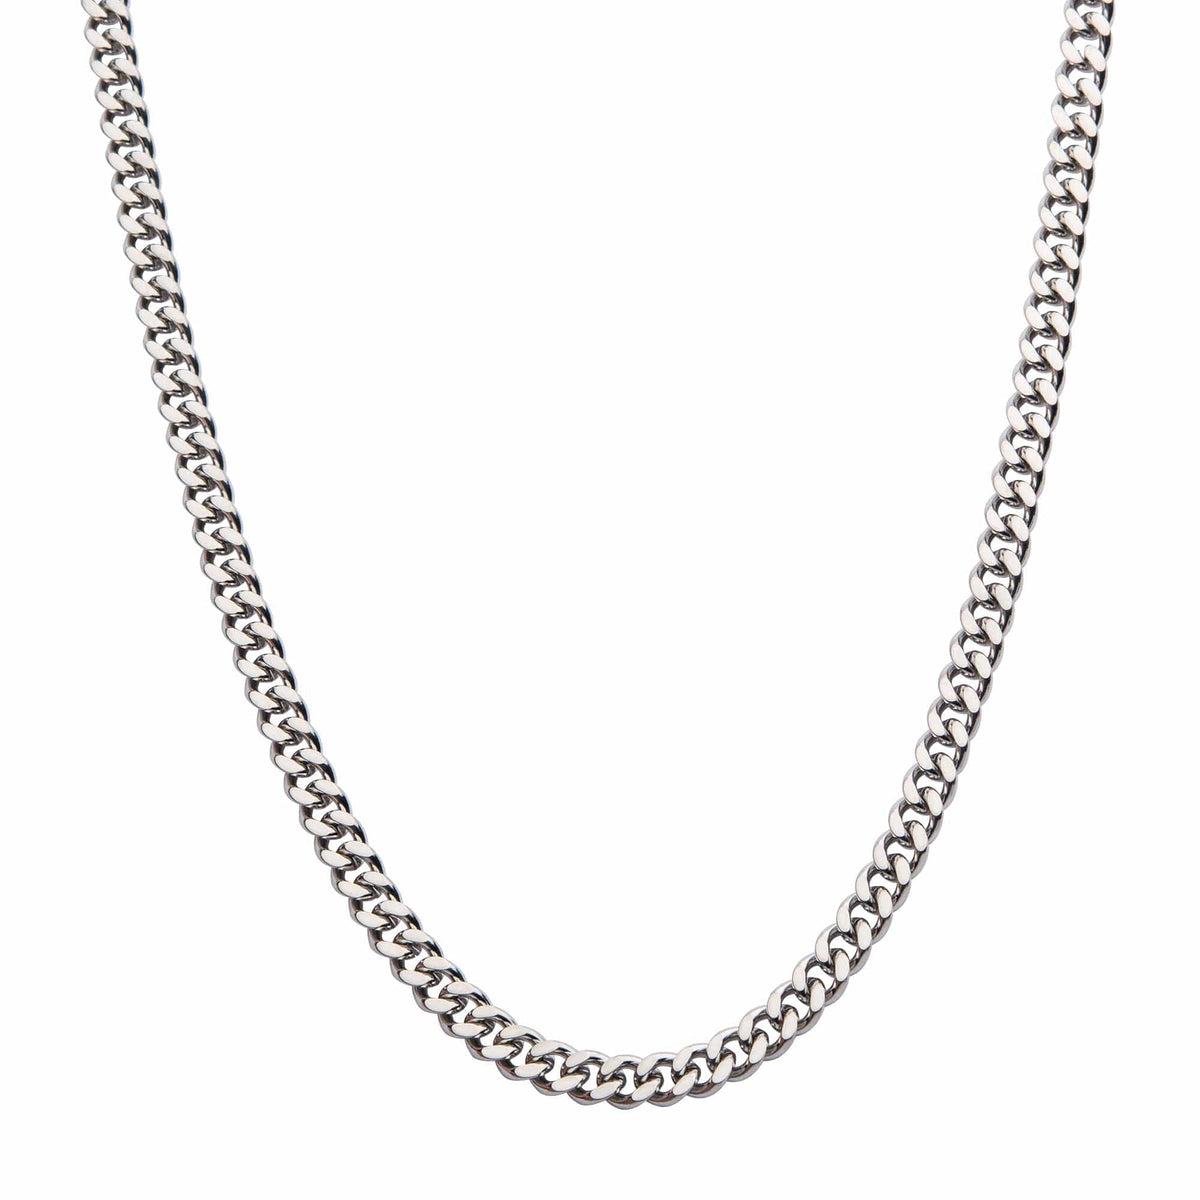 INOX JEWELRY Chains Silver Tone Stainless Steel 4mm Diamond Cut Curb Chain